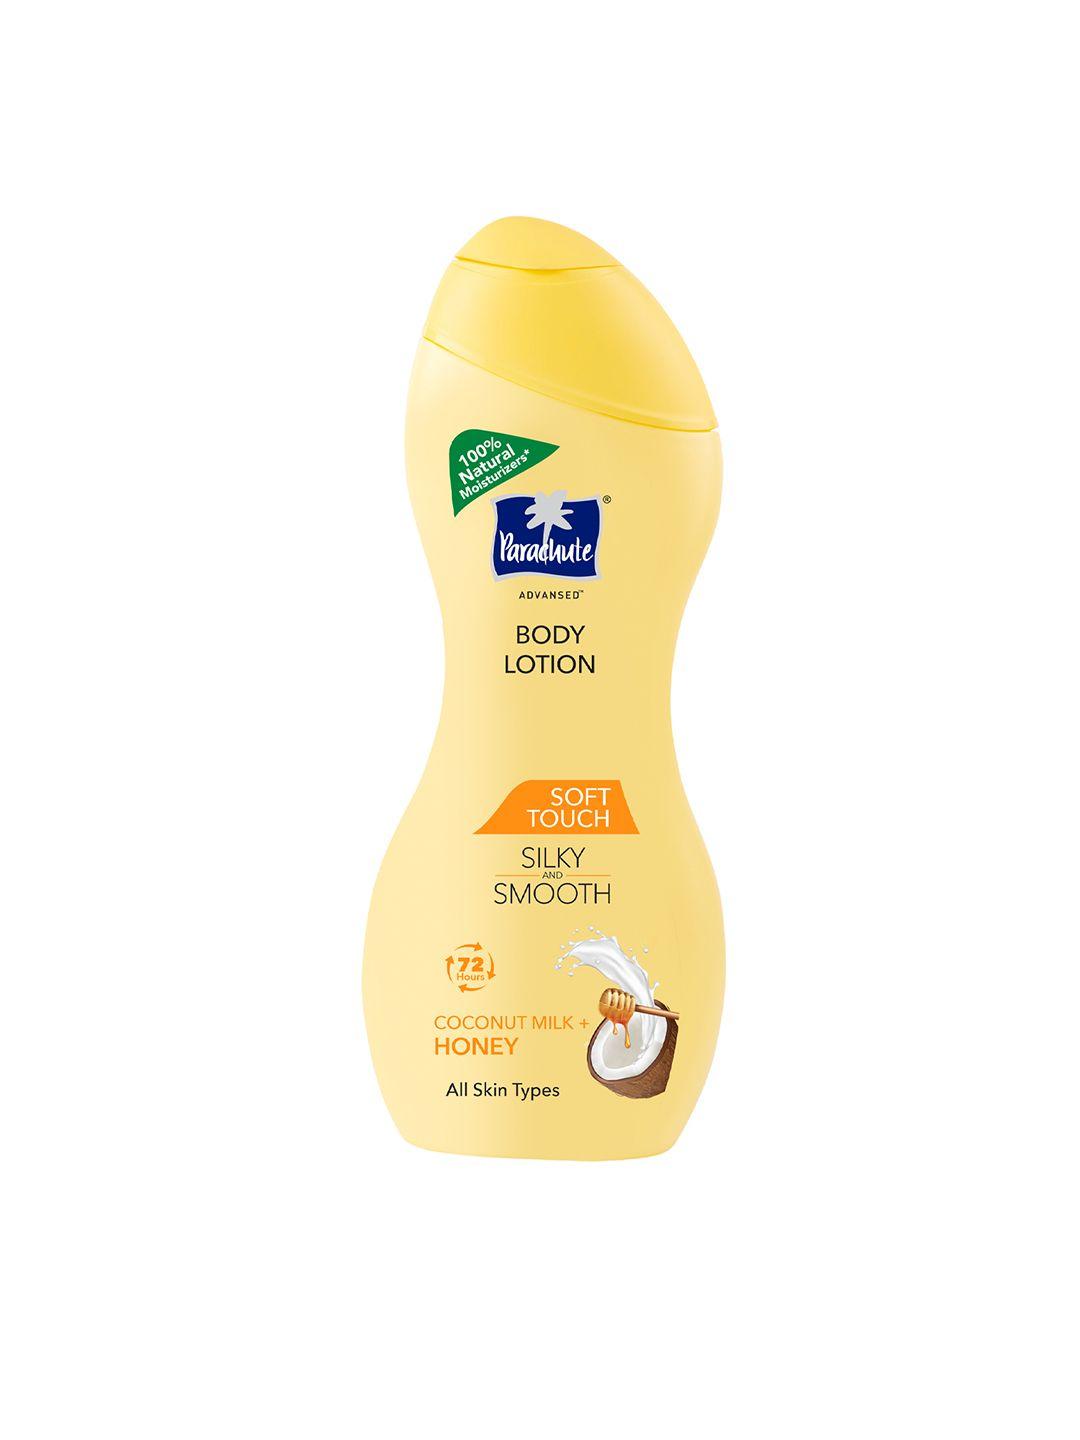 parachute advansed soft touch body lotion- 250 ml